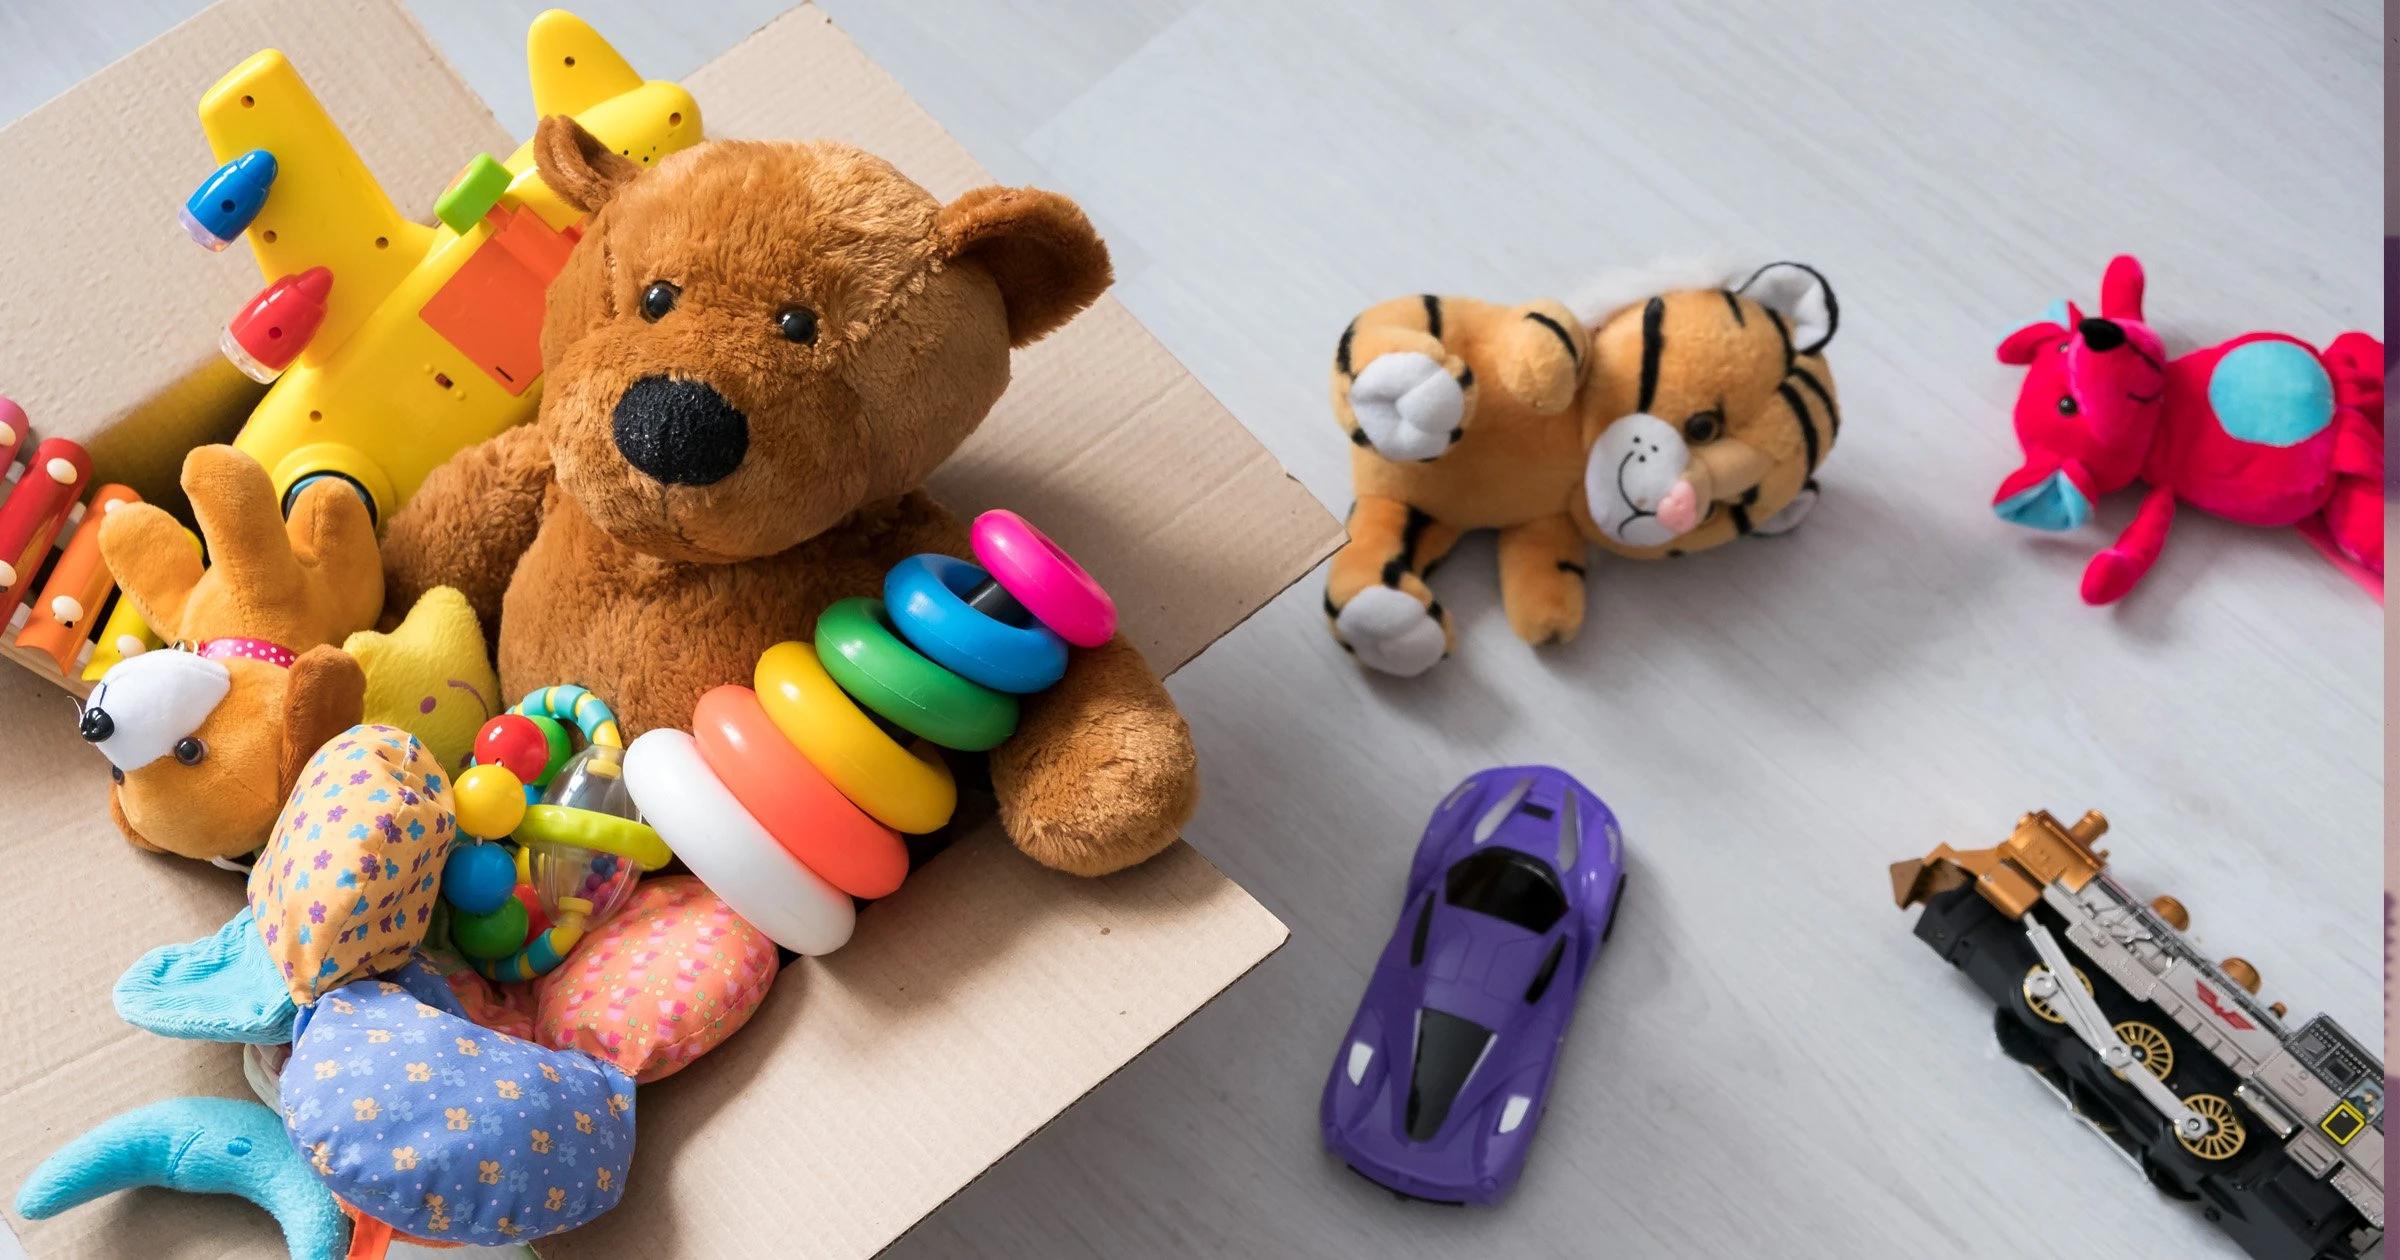 How To Make Sure The Toys You Buy Are Safe